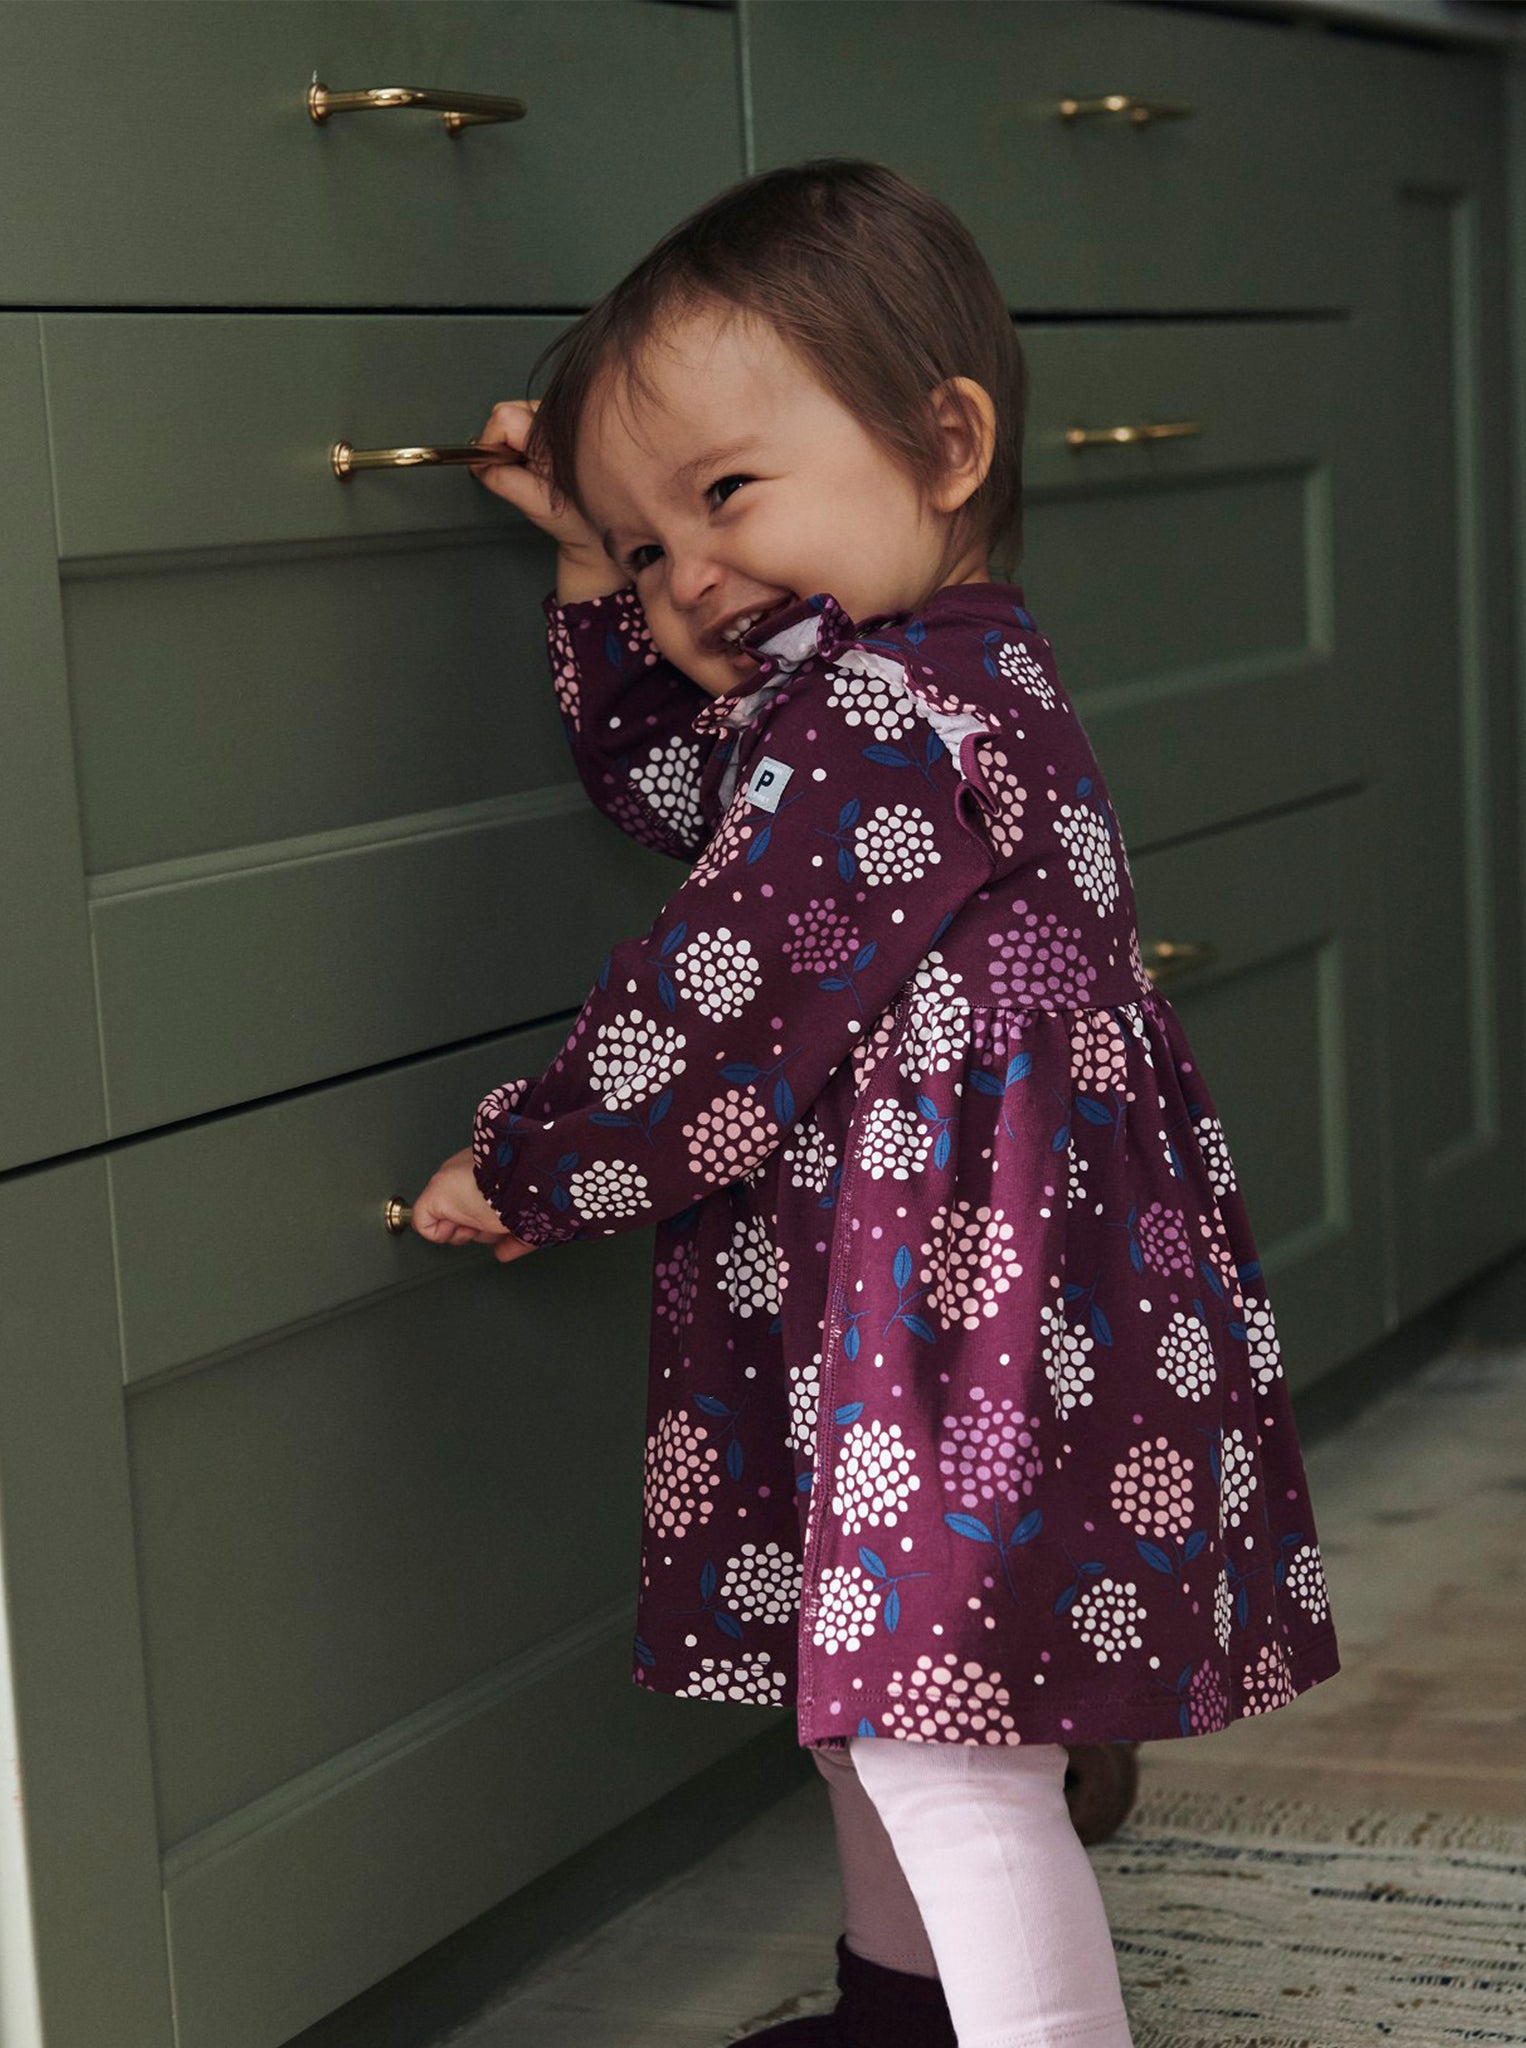 A baby girl wearing PO.P's sustainable purple floral baby dress made of organic cotton, playing with kitchen drawers